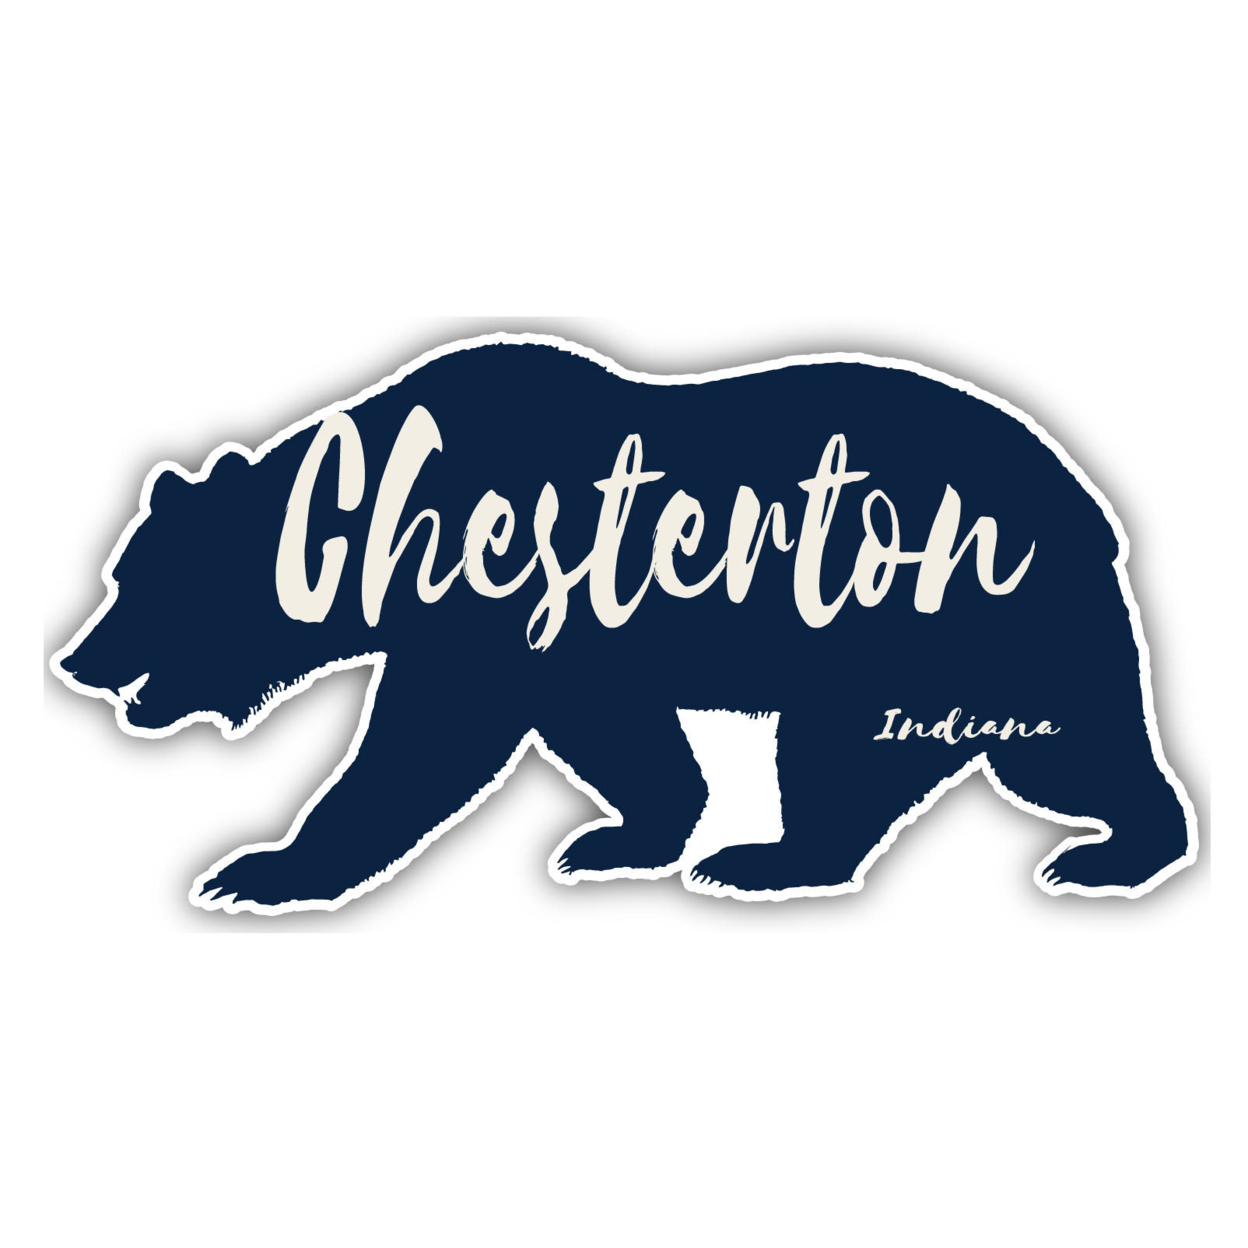 Chesterton Indiana Souvenir Decorative Stickers (Choose Theme And Size) - 4-Pack, 8-Inch, Adventures Awaits